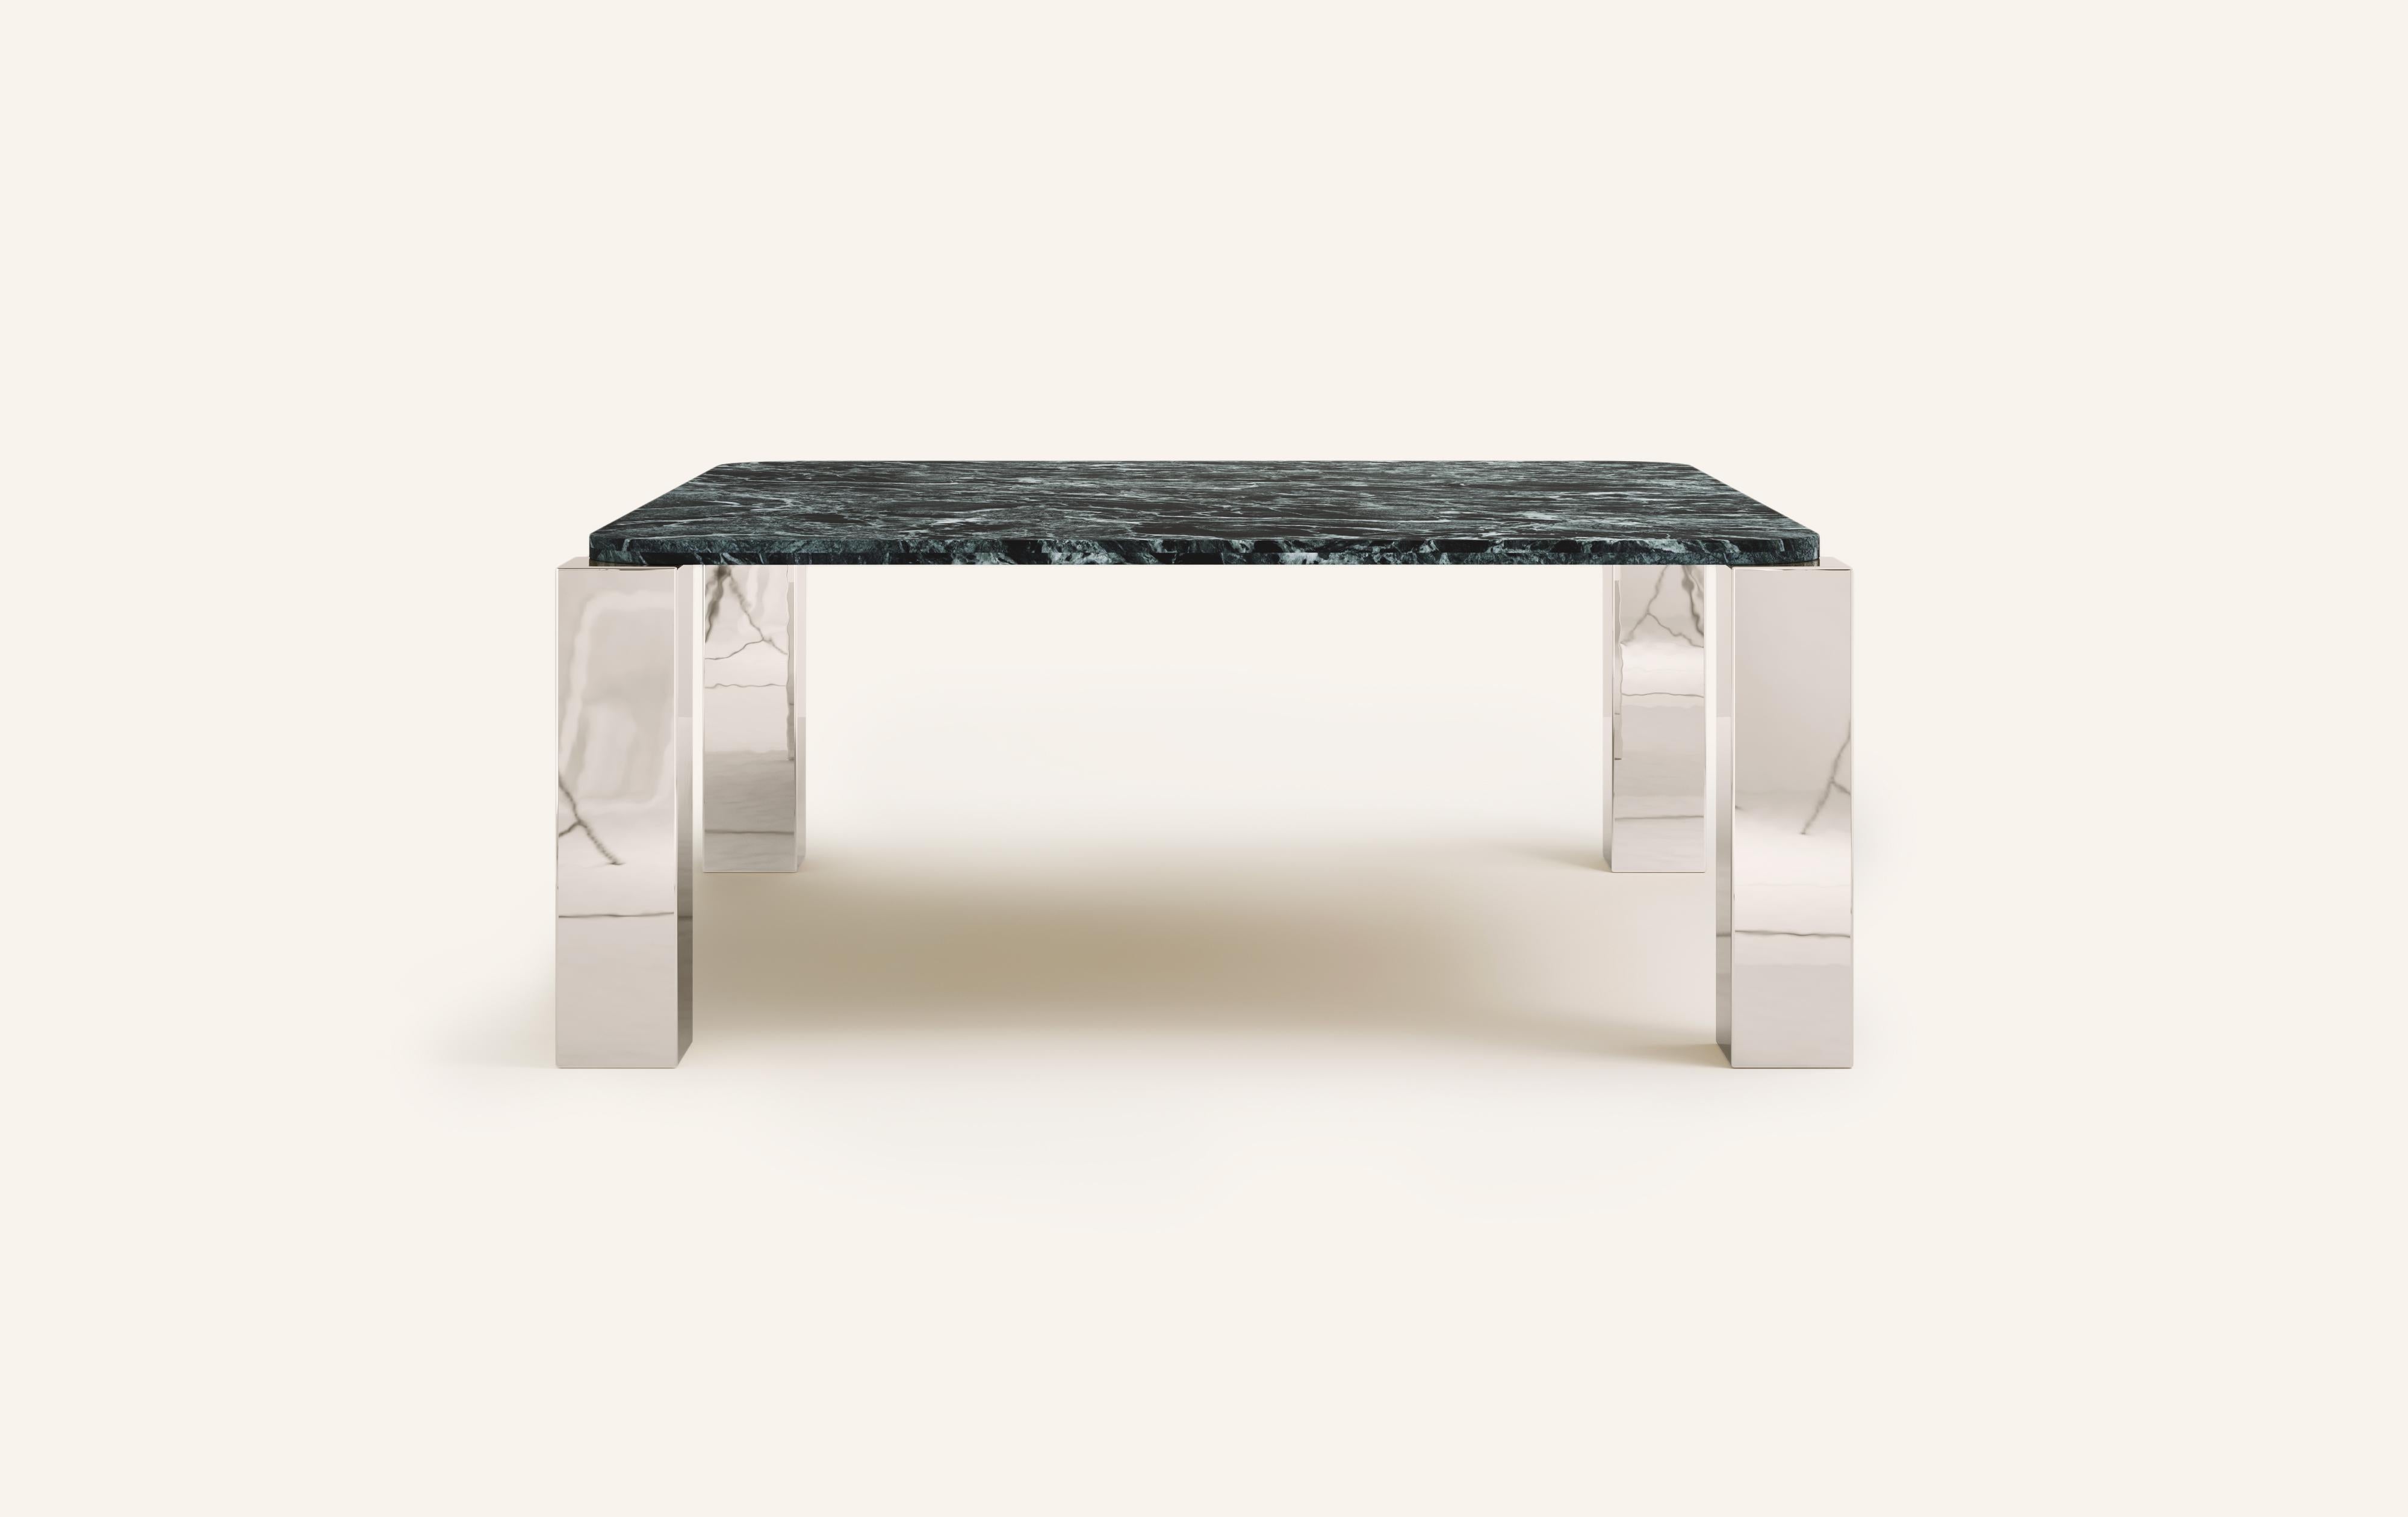 MONOLITHIC FORMS SOFTENED BY GENTLE EDGES. WITH ITS BOLD MARBLE PATTERNS CUBO IS AS VERSATILE AS IT IS STRIKING.

DIMENSIONS:
74”L x 74”W x 30”H: 
- 72”L x 72”W x 1.5” THICK TABLETOP WITH WITH 6